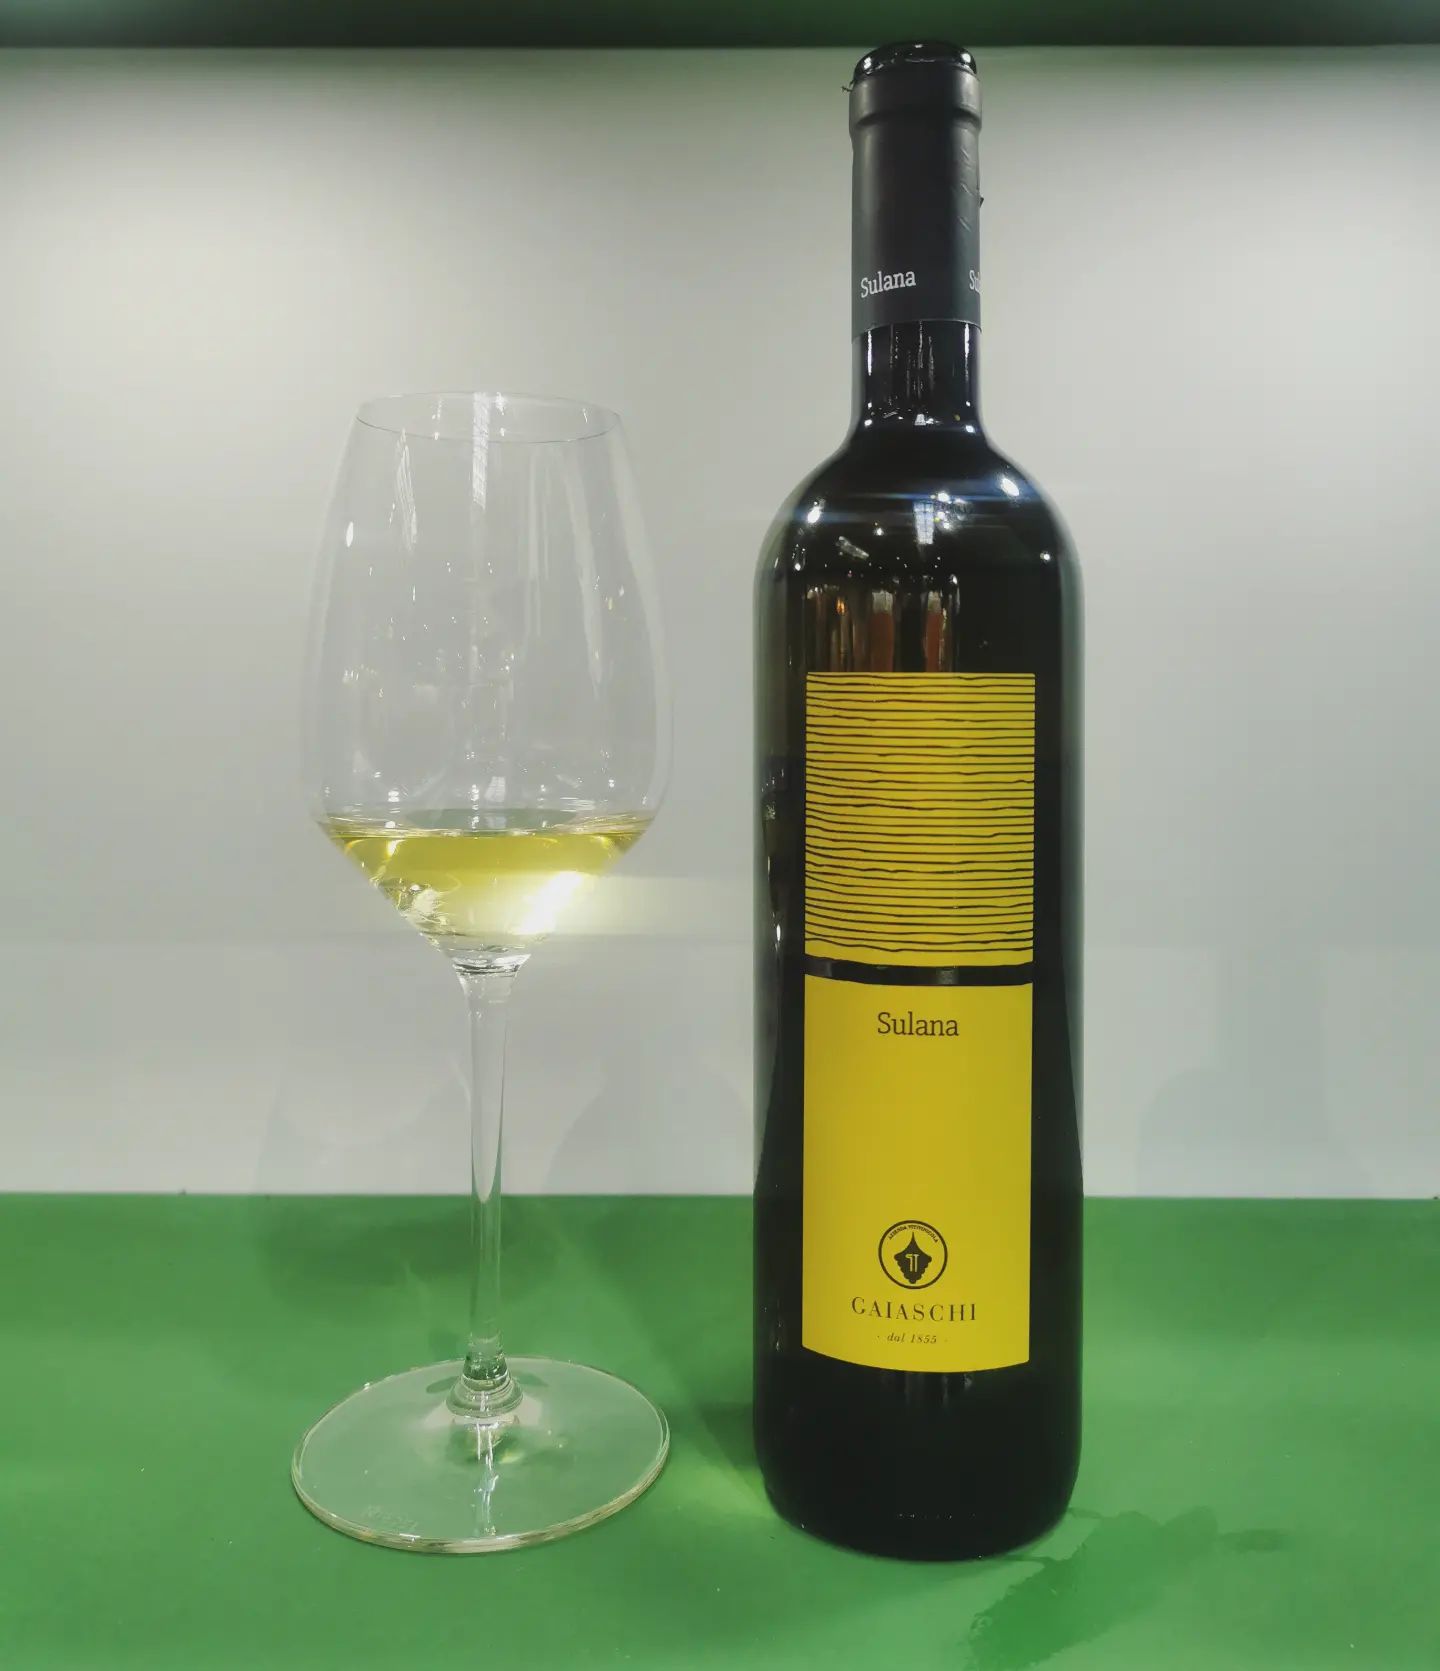 Last chance to stop by and try our Malvasia di Candia Aromatica, we think you will love it!
Hall 5 Stand C25
#iobevogaiaschi
#prowein
#cheersprowein
#endlichwiedermesse
#finallytradefair
#collipiacentini #valtidone #Malvasia #malvasiadicandiaaromatica #piacenza #milano